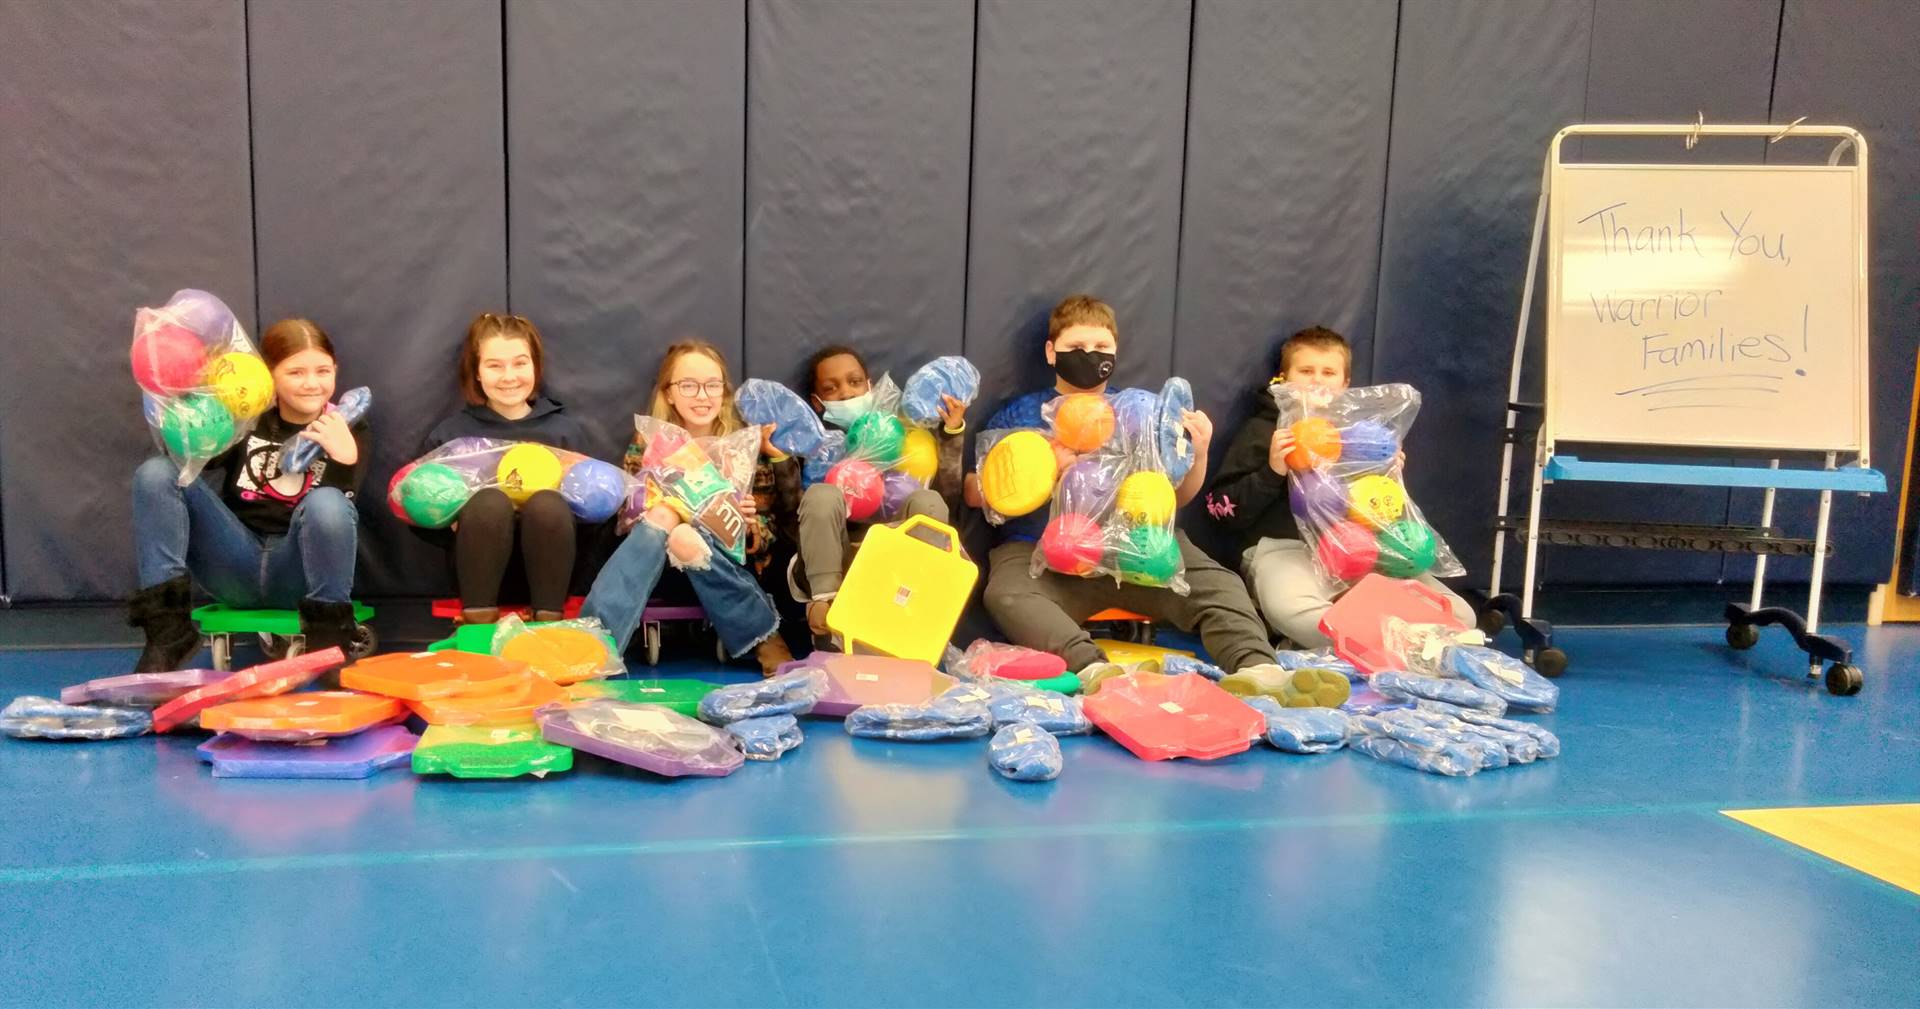 Students are excited to use equipment purchased with Read-A-Thon money in gym class